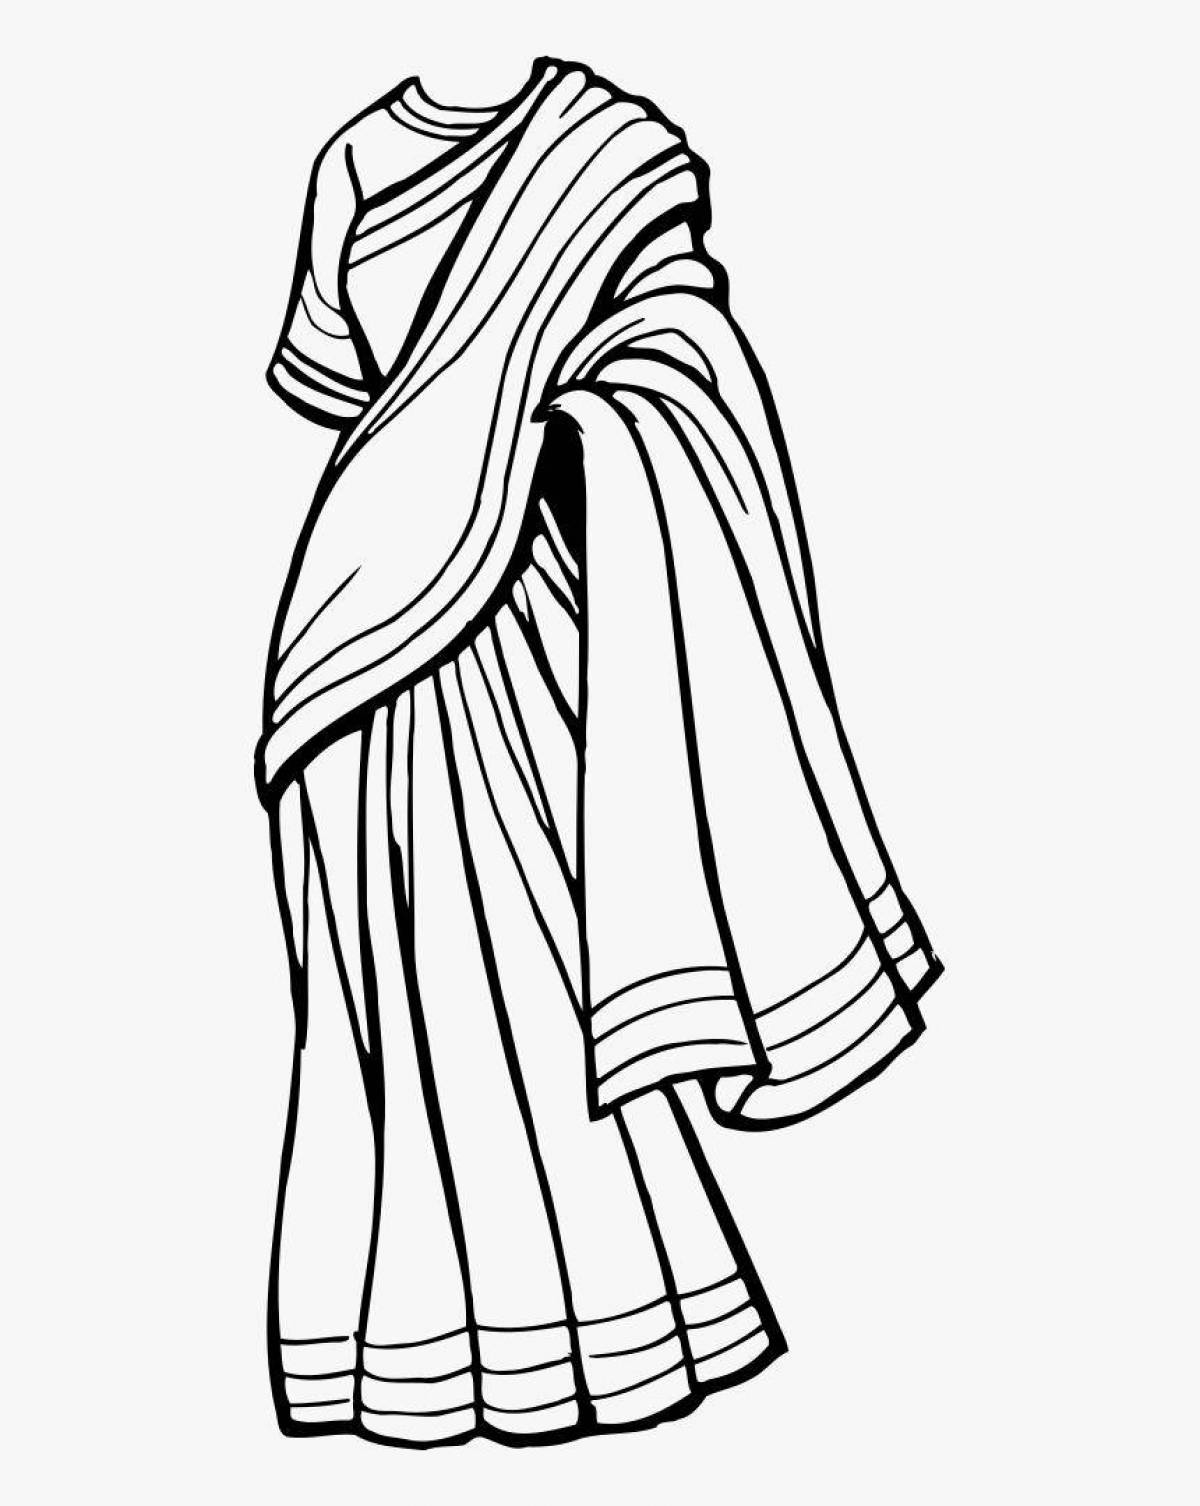 Playful Greek costume coloring page